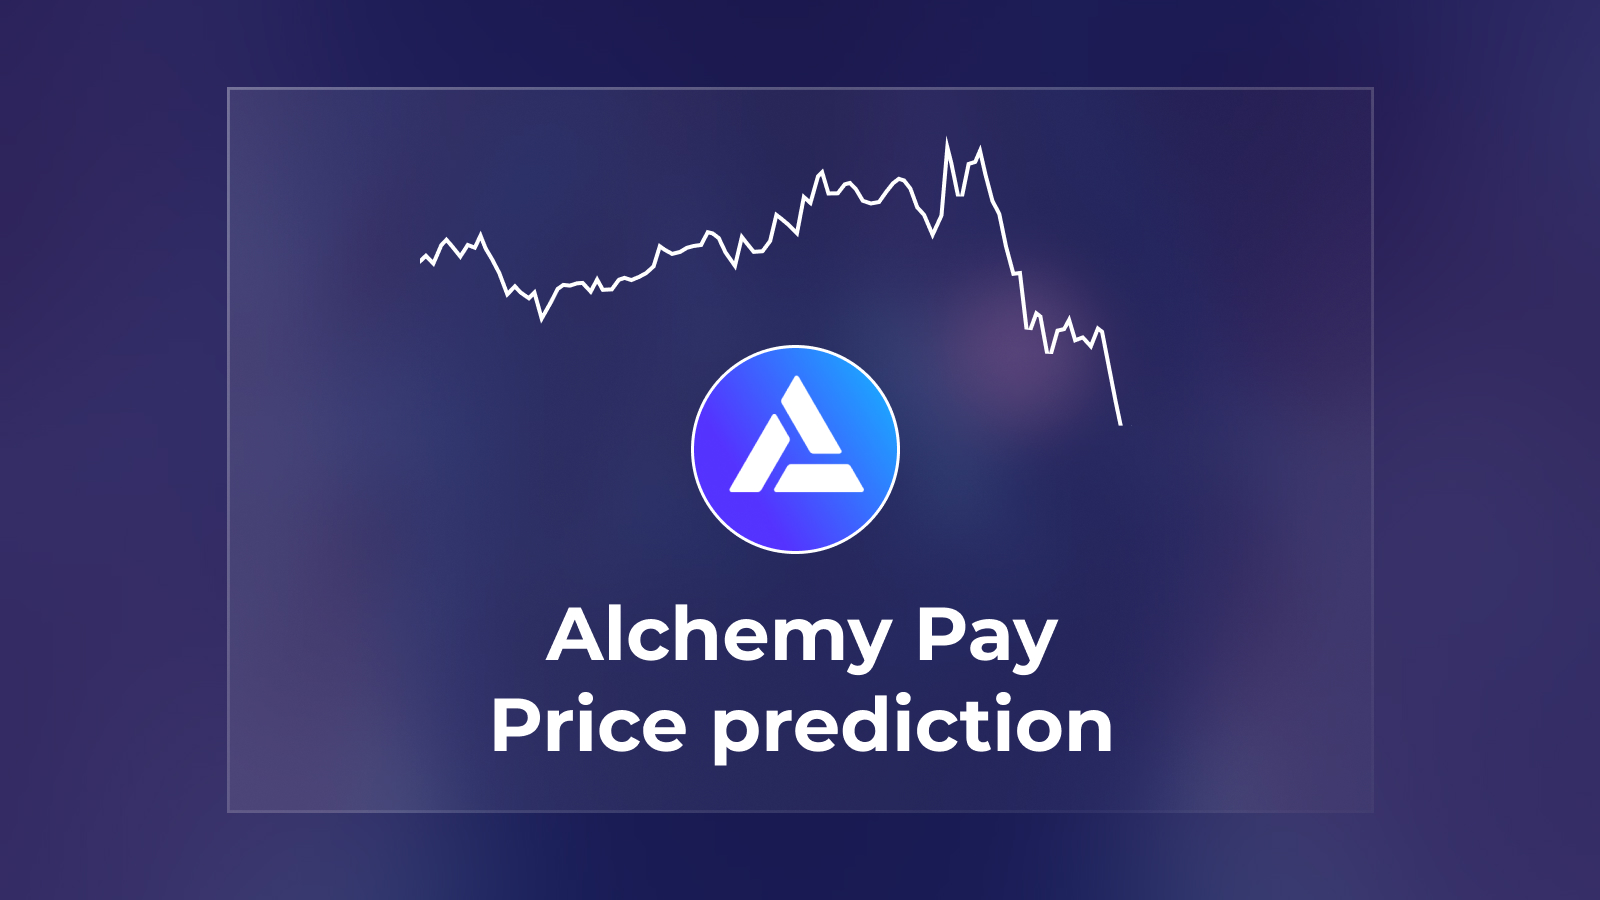 Alchemy Pay Price Prediction - What's the Future of ACH?